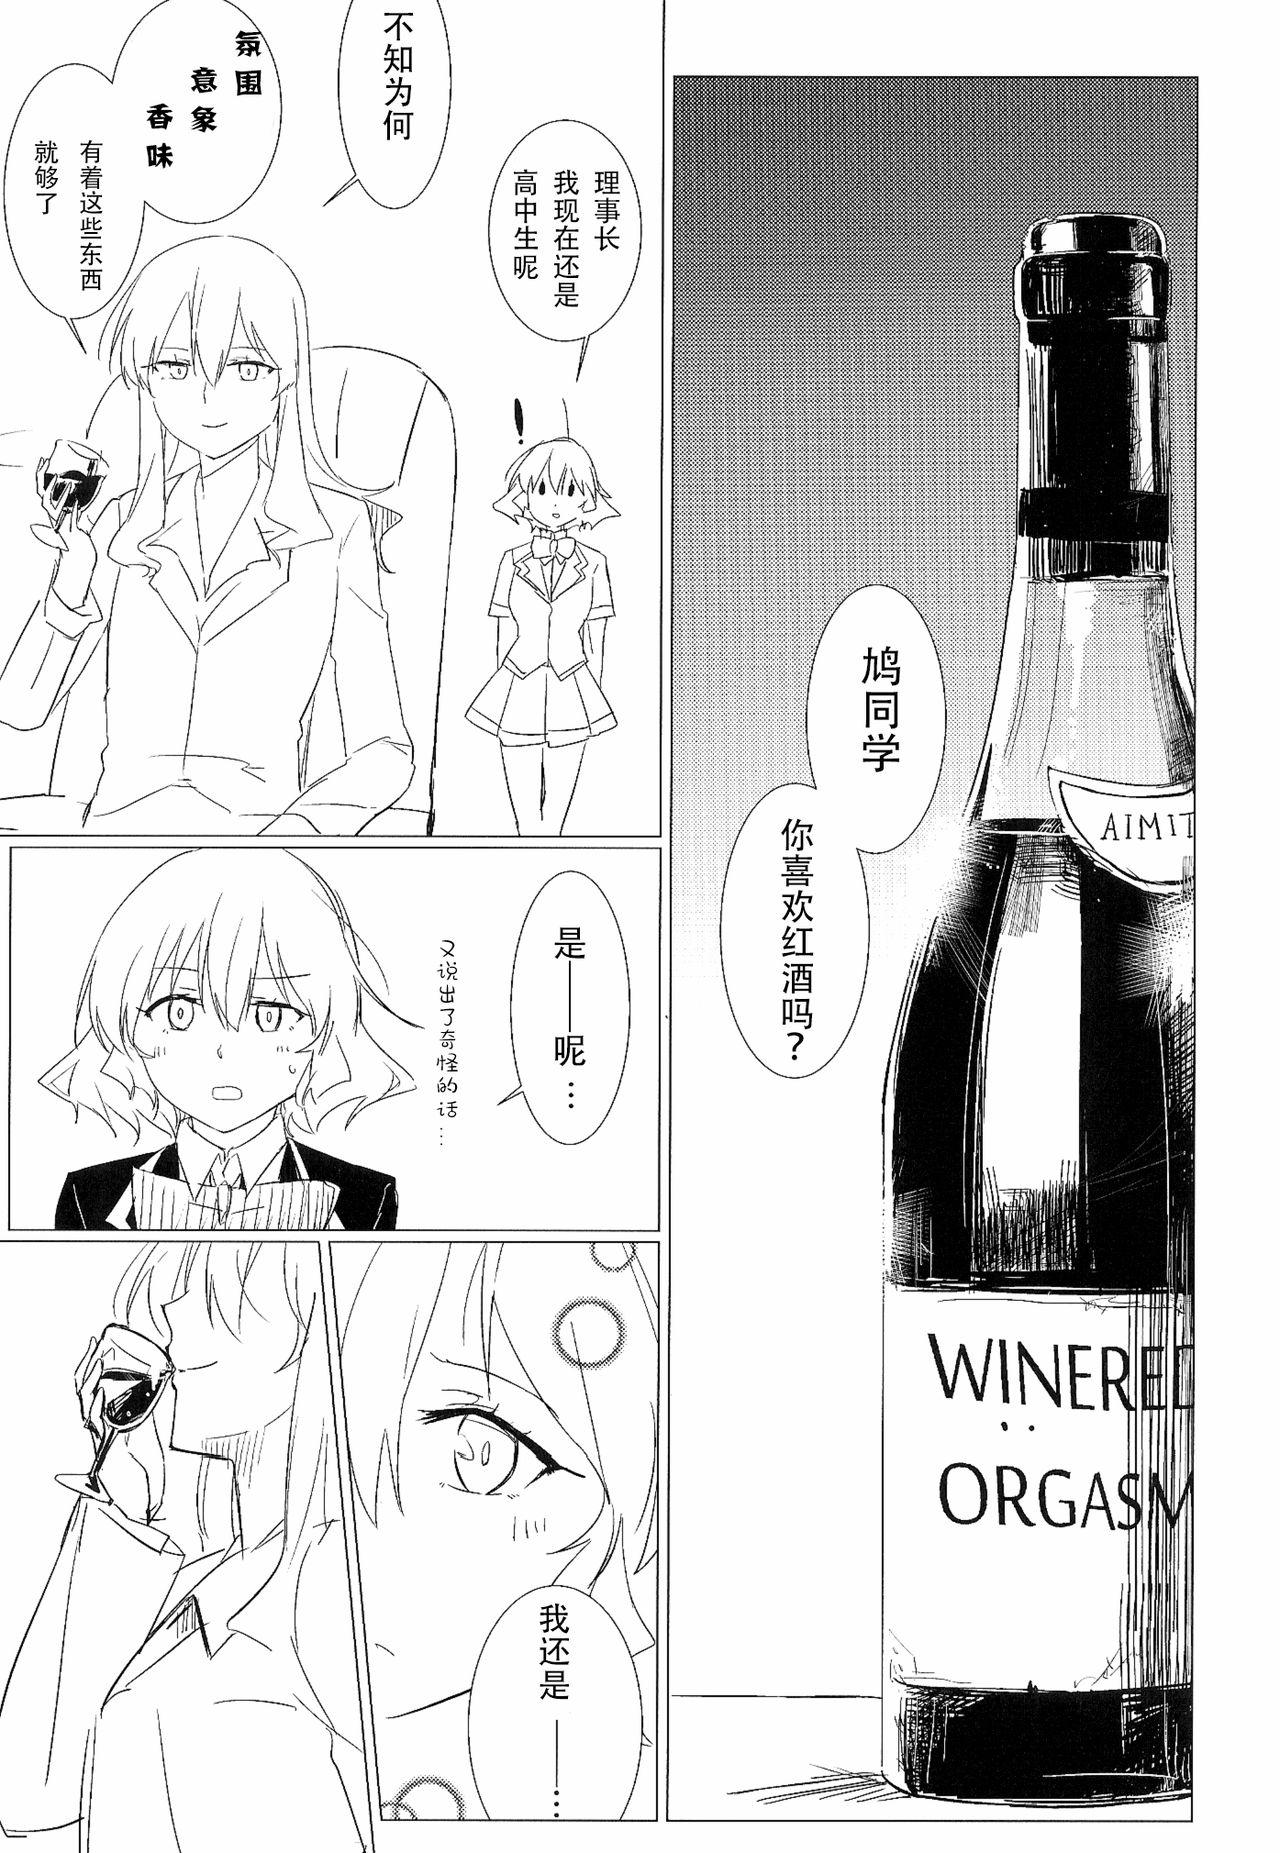 Ginger Wine Red Orgasm - Akuma no riddle Funny - Page 4